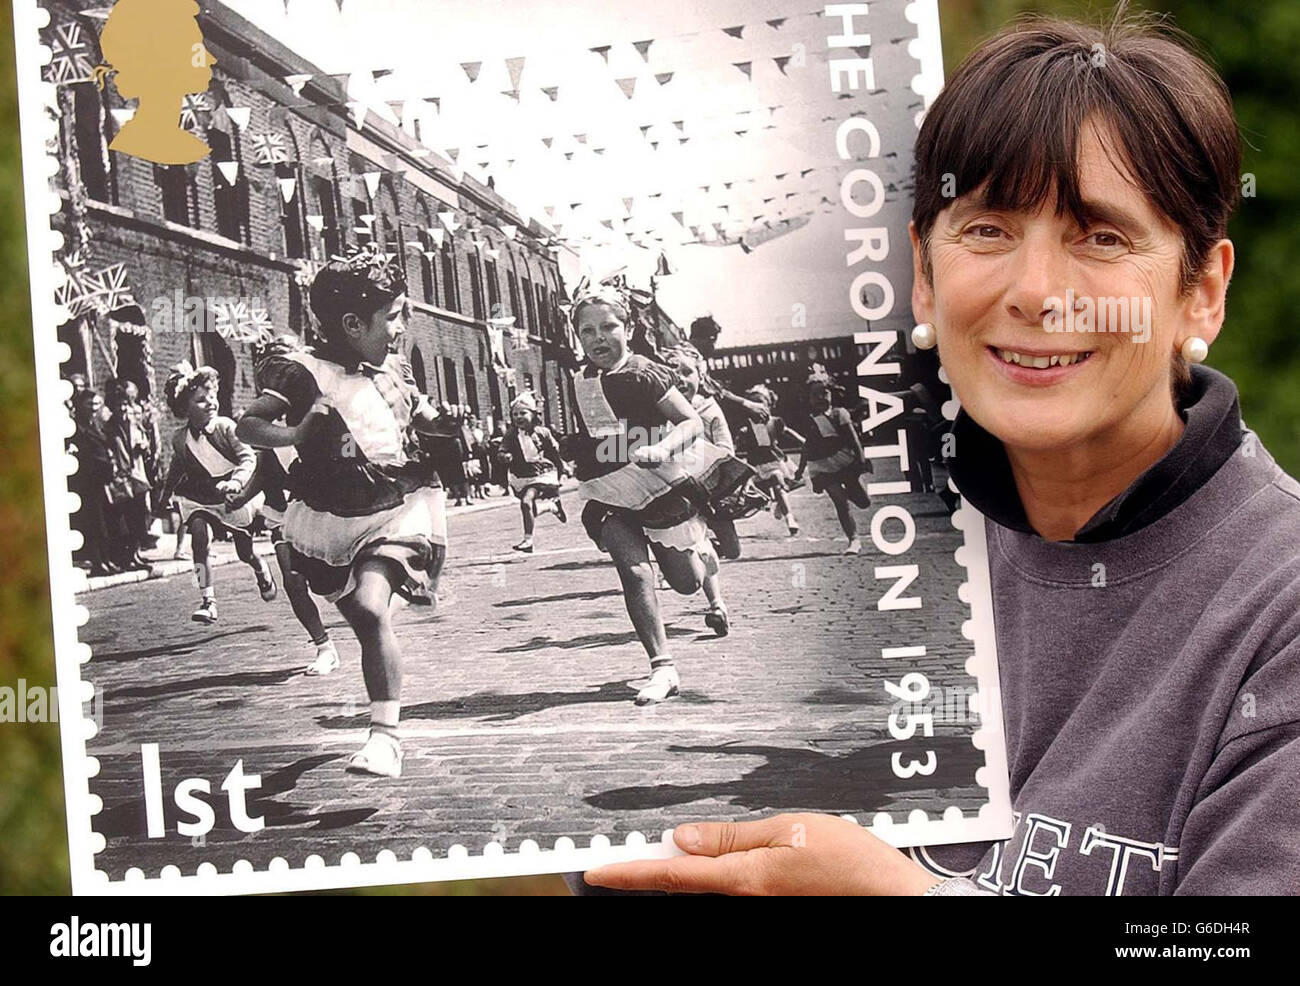 Lorraine Cross, 56, holds a poster sized copy of a new Royal Mail stamp, which is one of ten on sale. The stamp shows her winning a running race in Morpeth Street, Bethnal Green, London, during the celebrations for the Coronation of Queen Elizabeth II in 1953. Stock Photo